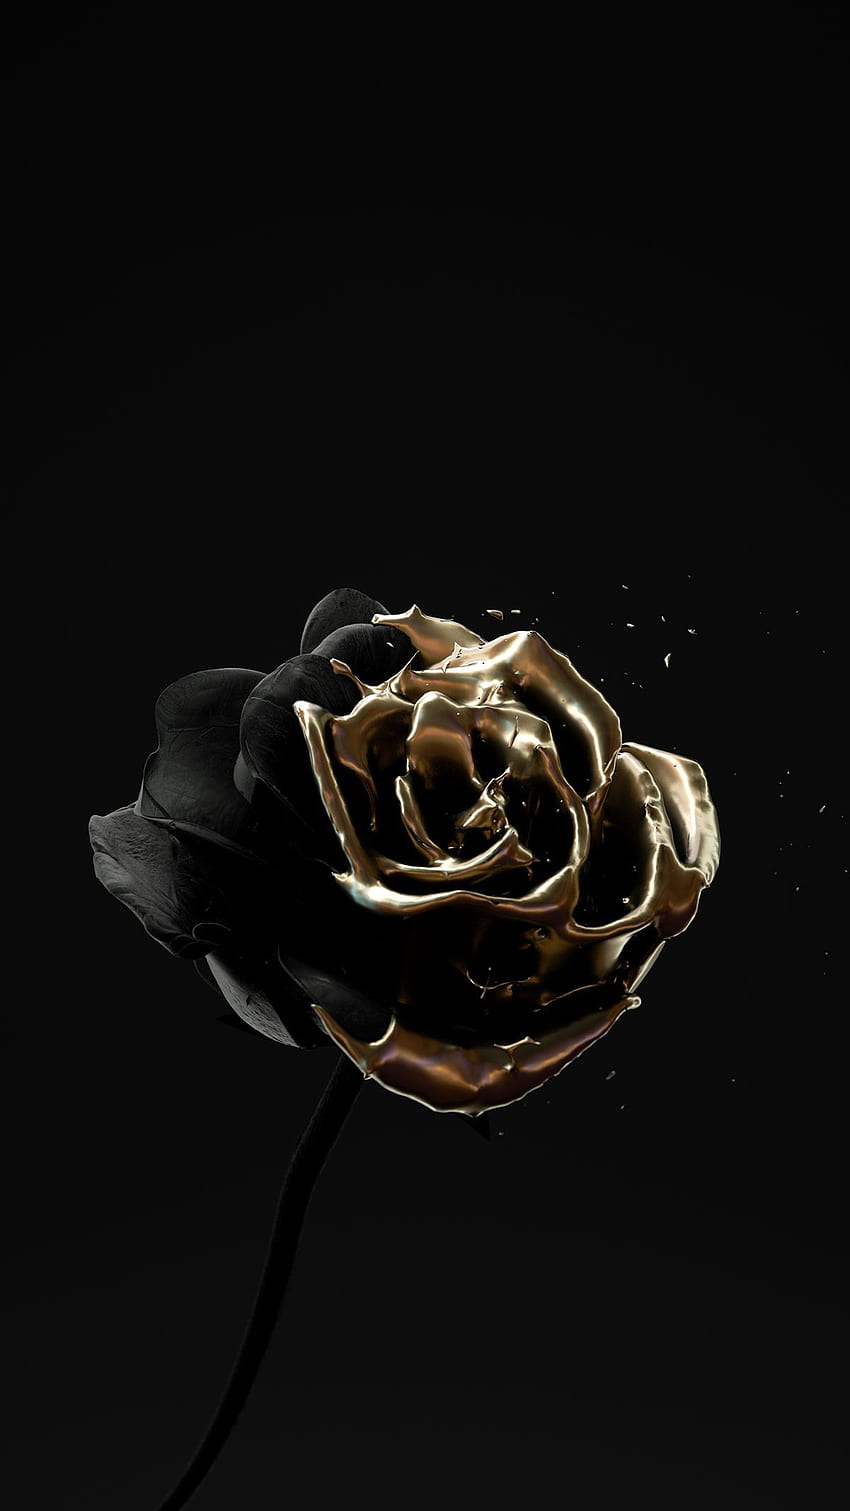 100 Black And Gold Aesthetic Background s  Wallpaperscom